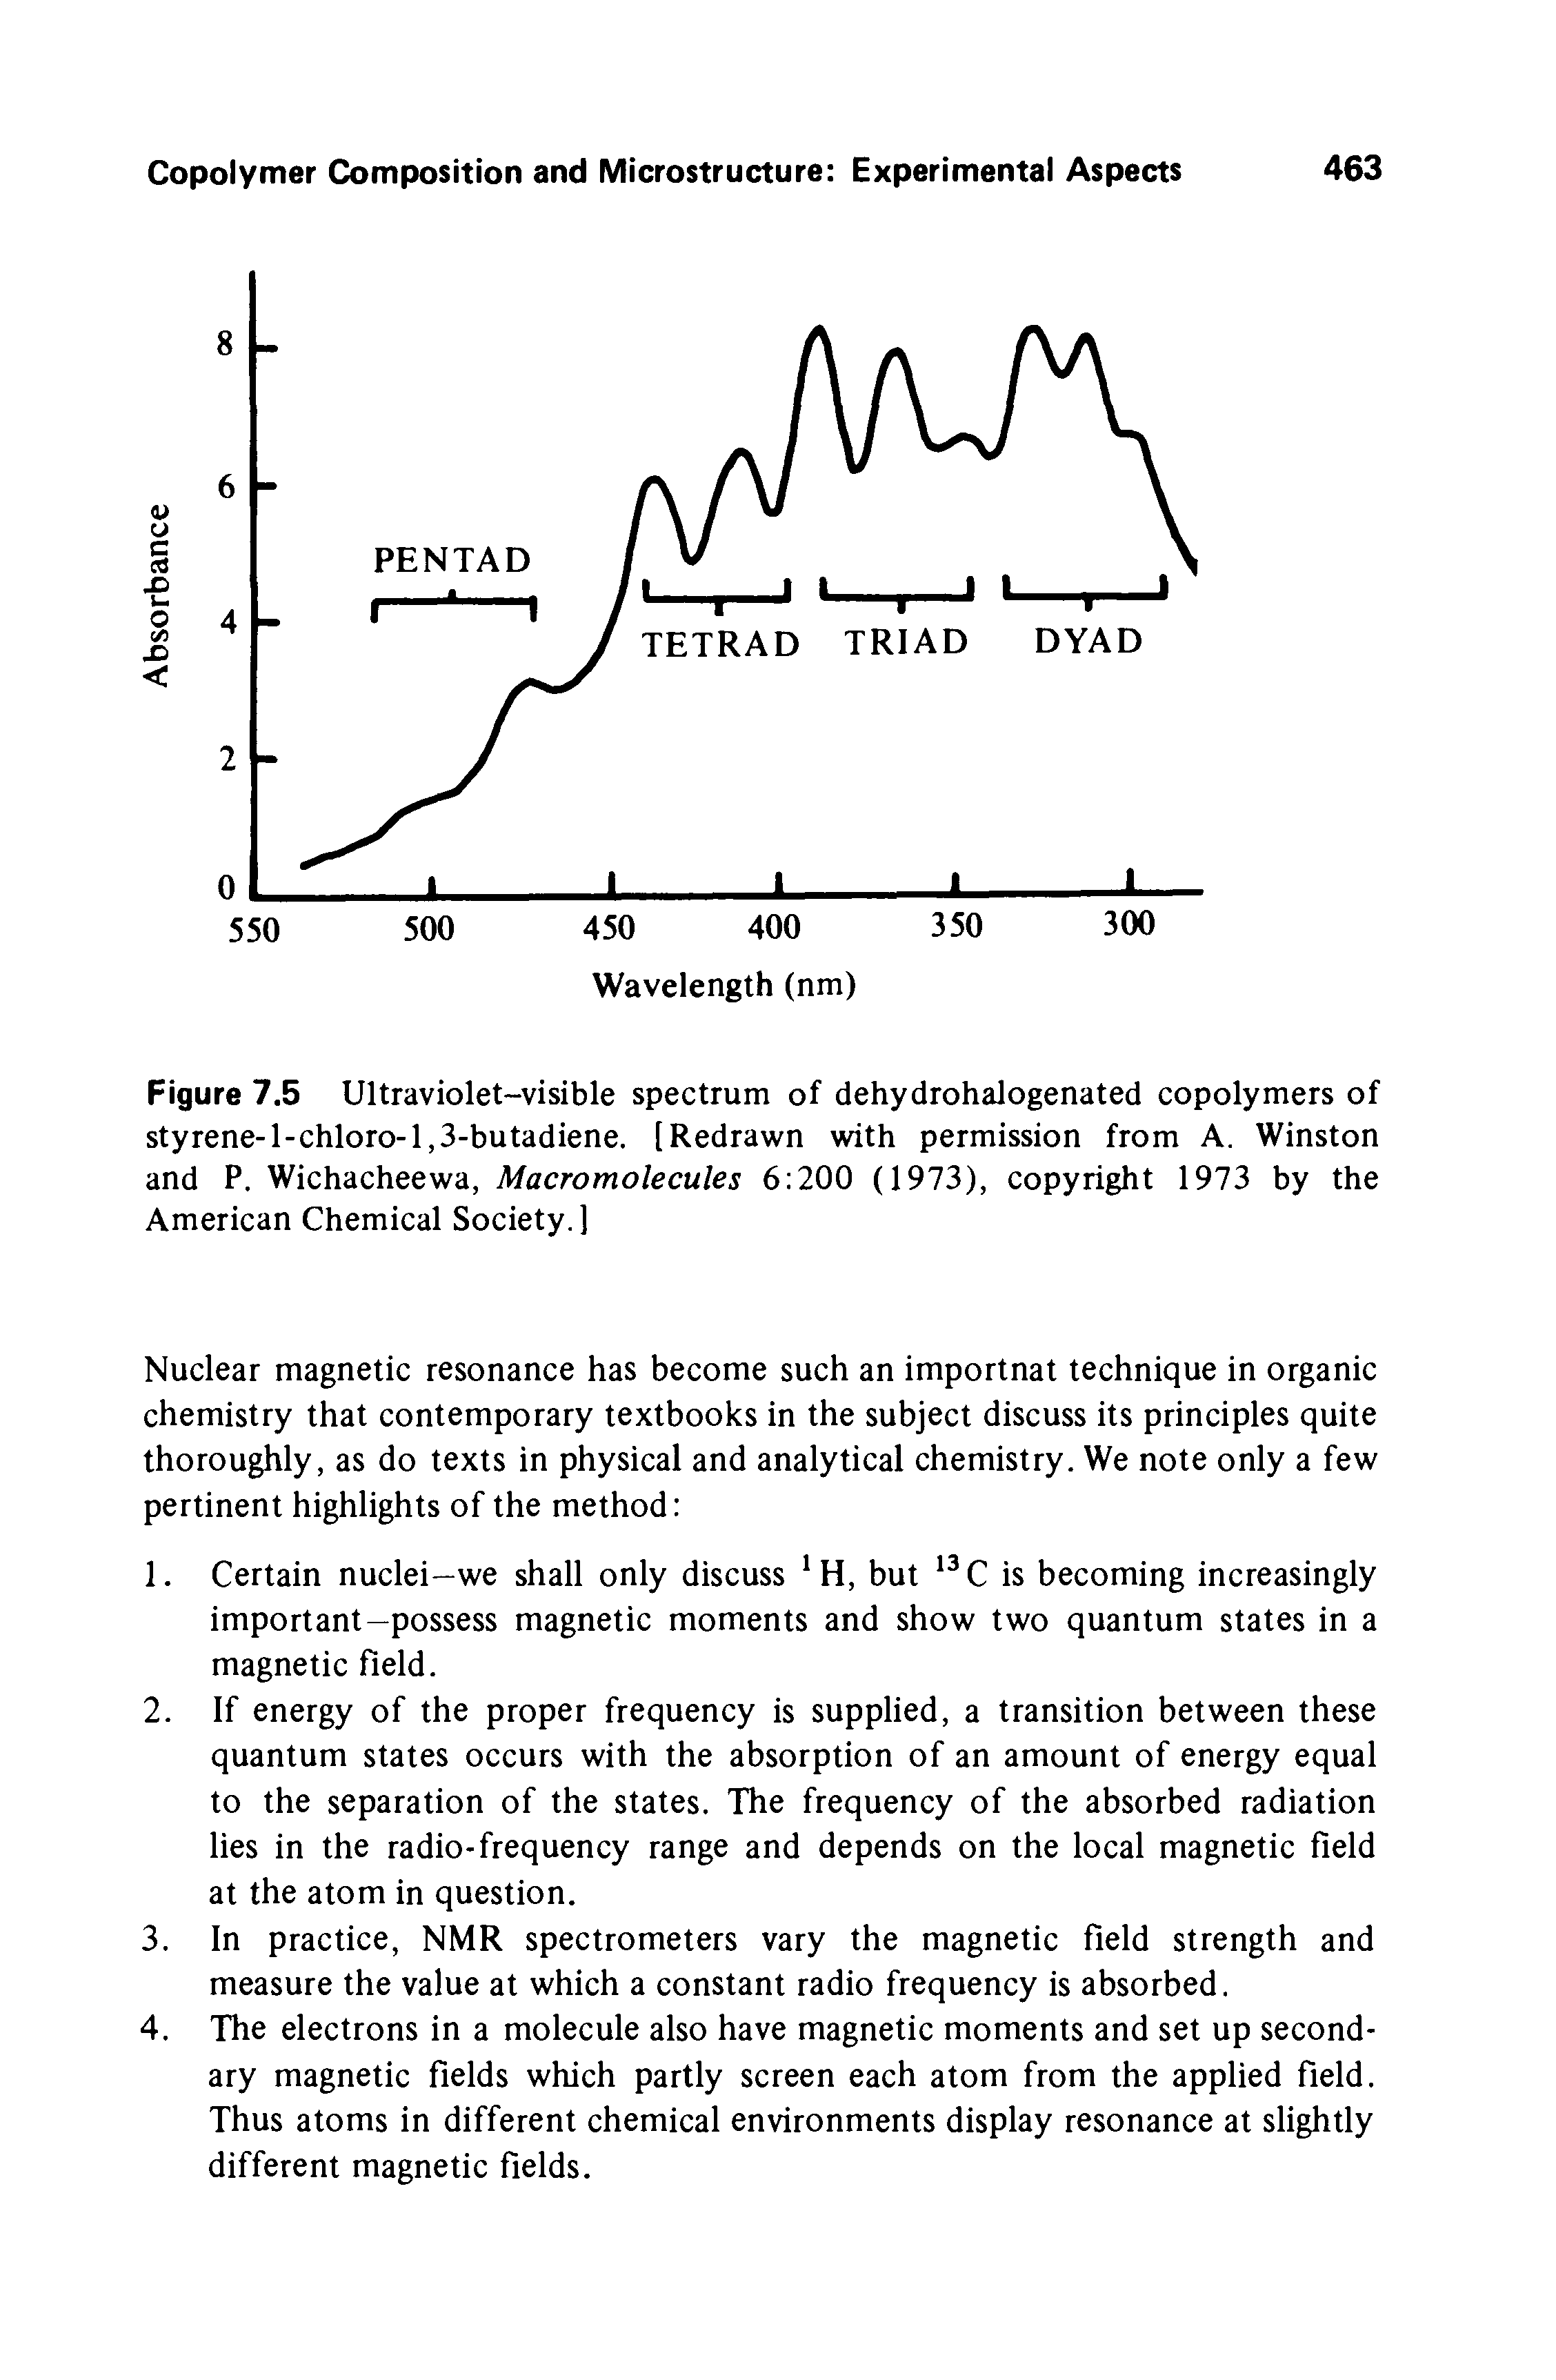 Figure 7.5 Ultraviolet-visible spectrum of dehydrohalogenated copolymers of styrene-l-chloro-1,3-butadiene. [Redrawn with permission from A. Winston and P. Wichacheewa, Macromolecules 6 200 (1973), copyright 1973 by the American Chemical Society.]...